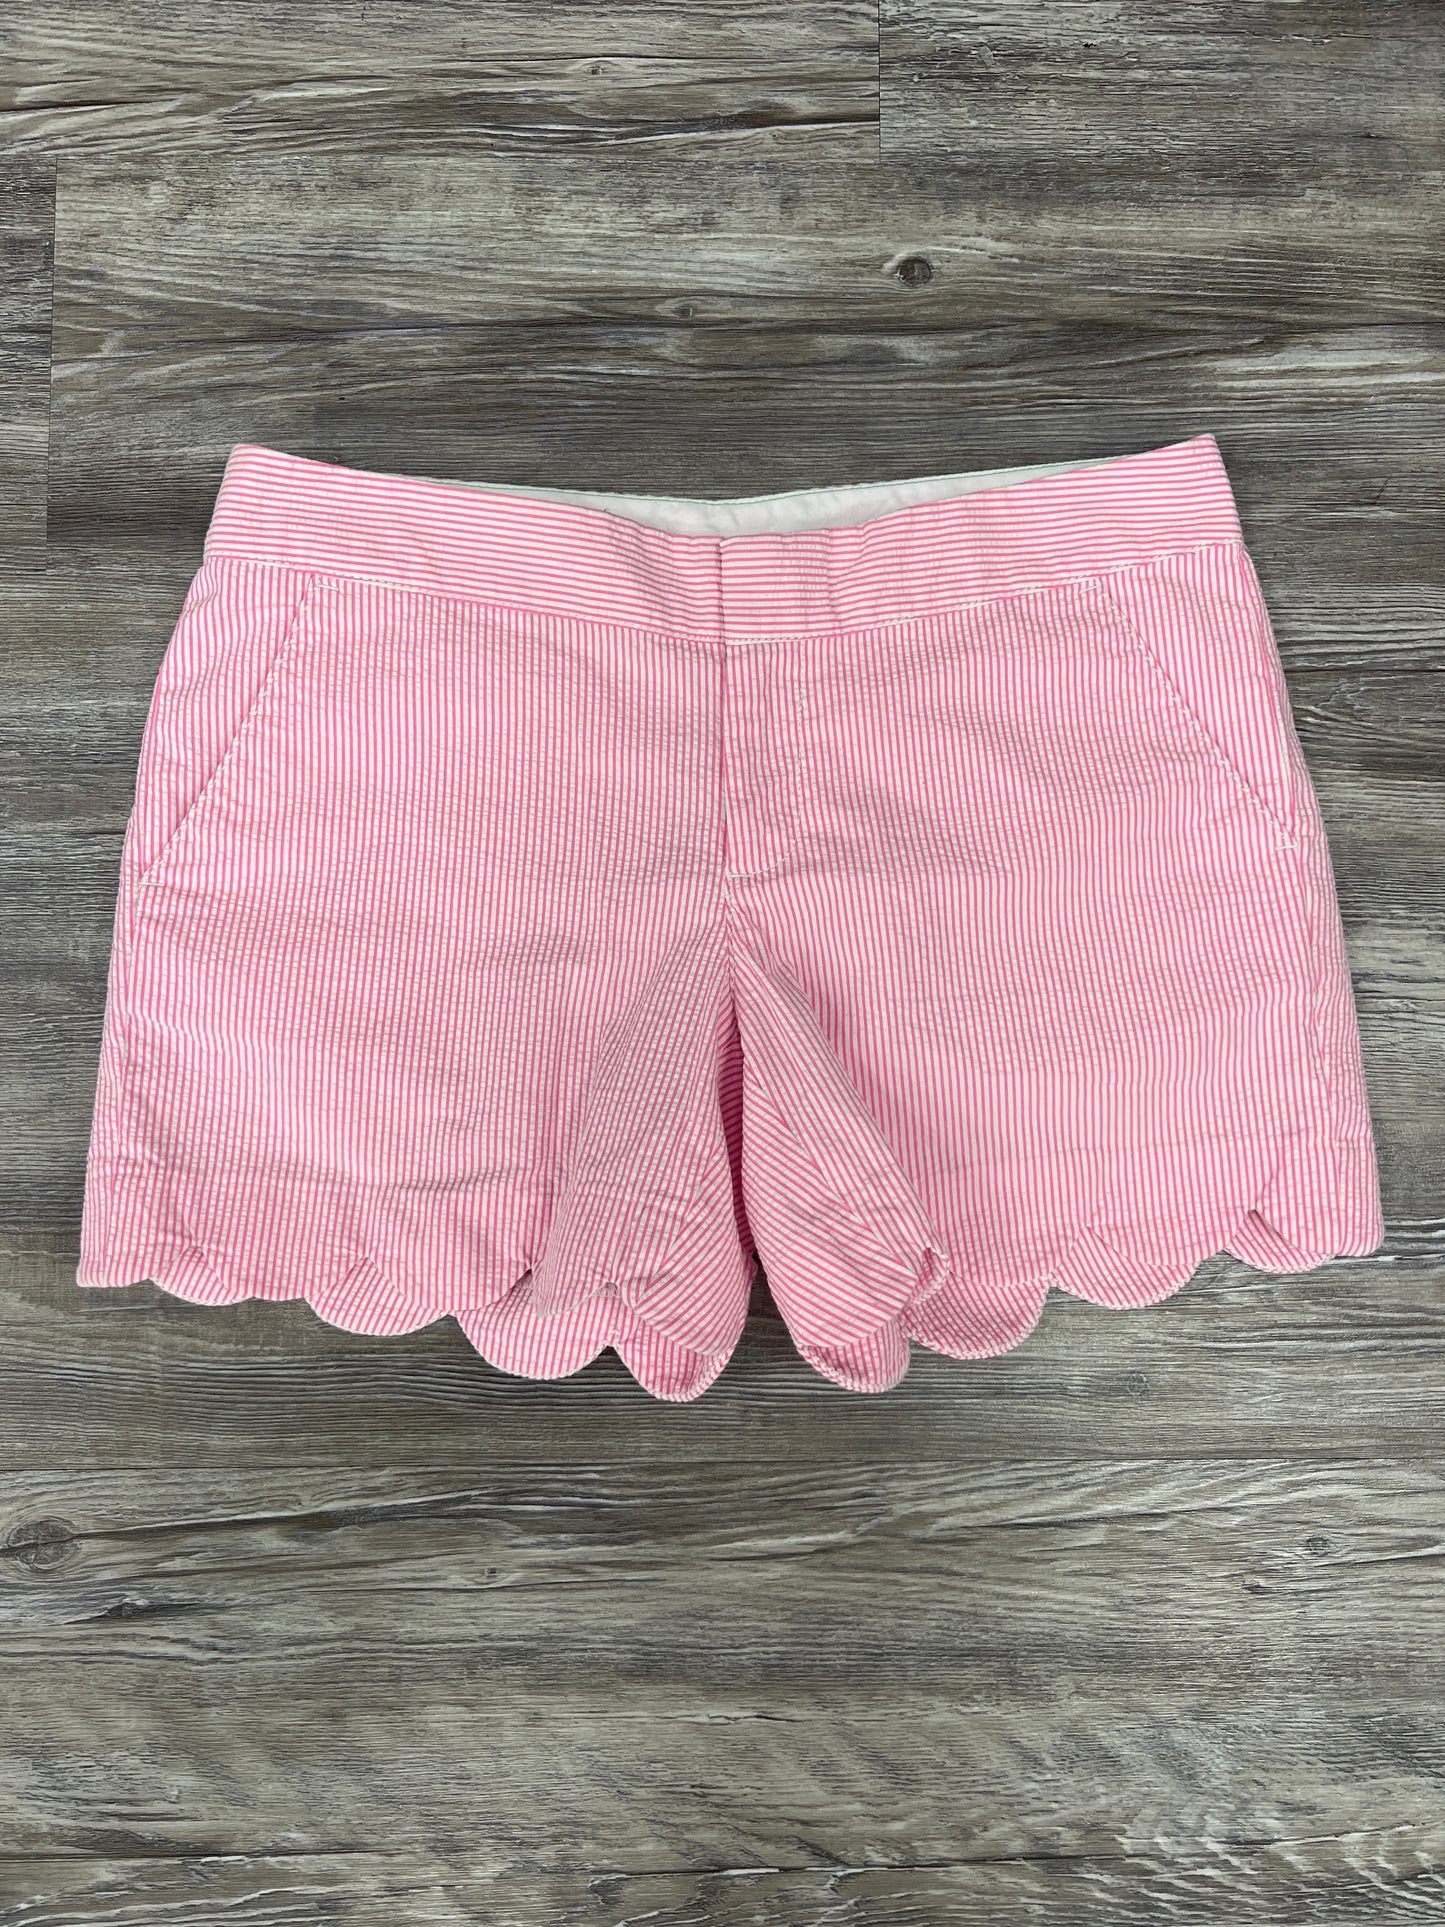 Shorts By Lilly Pulitzer Size: 6